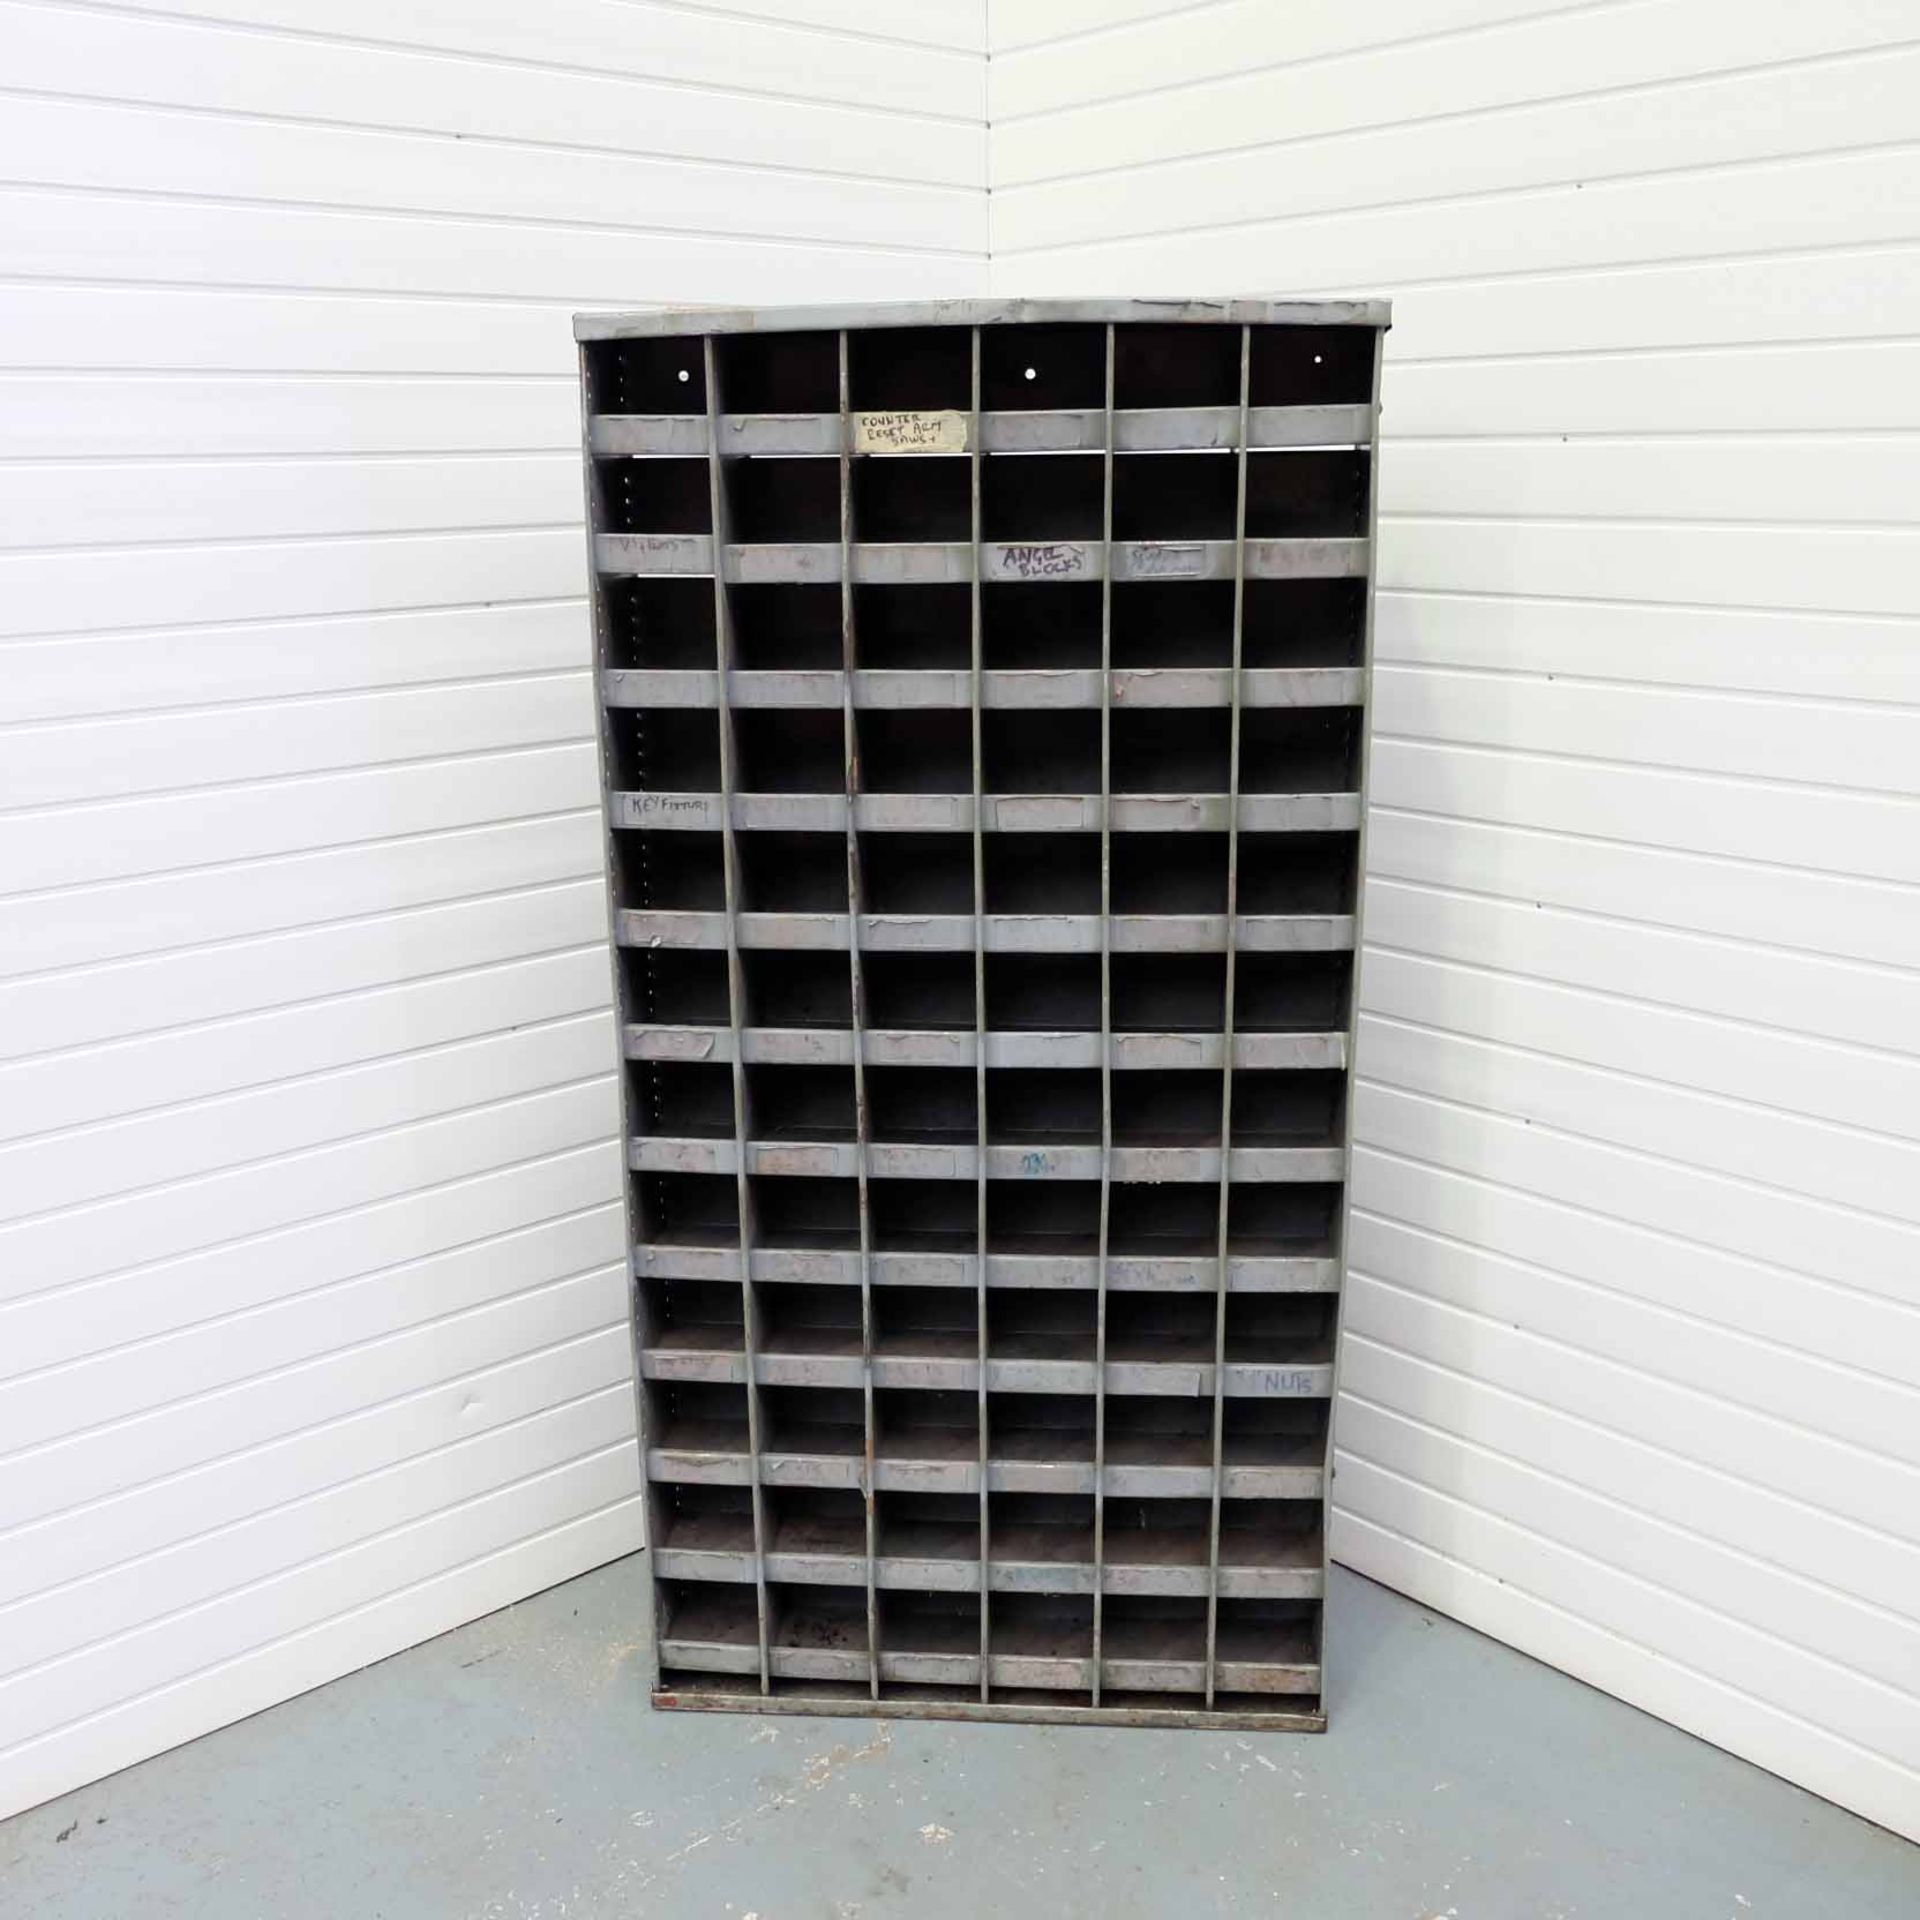 Set of Steel Pigeon Holes. 78 Compartments. Size 36" x 8 3/4" x 72" High.